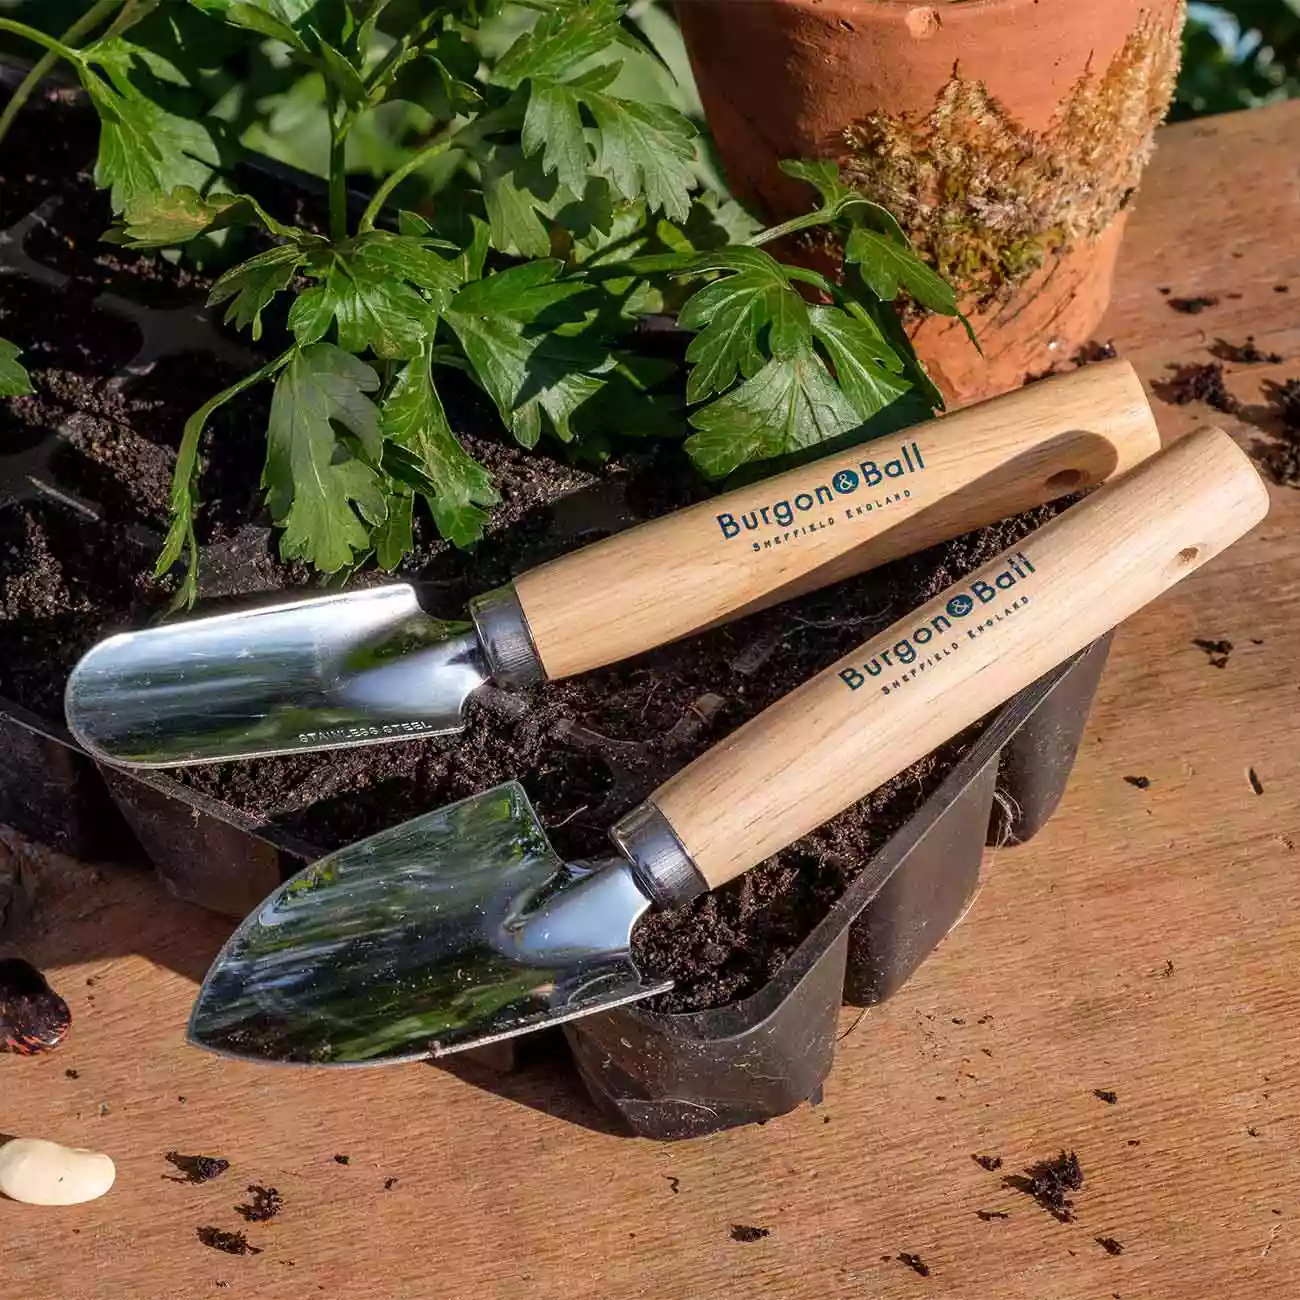 Hand Trowels from Burgon &Ball brand